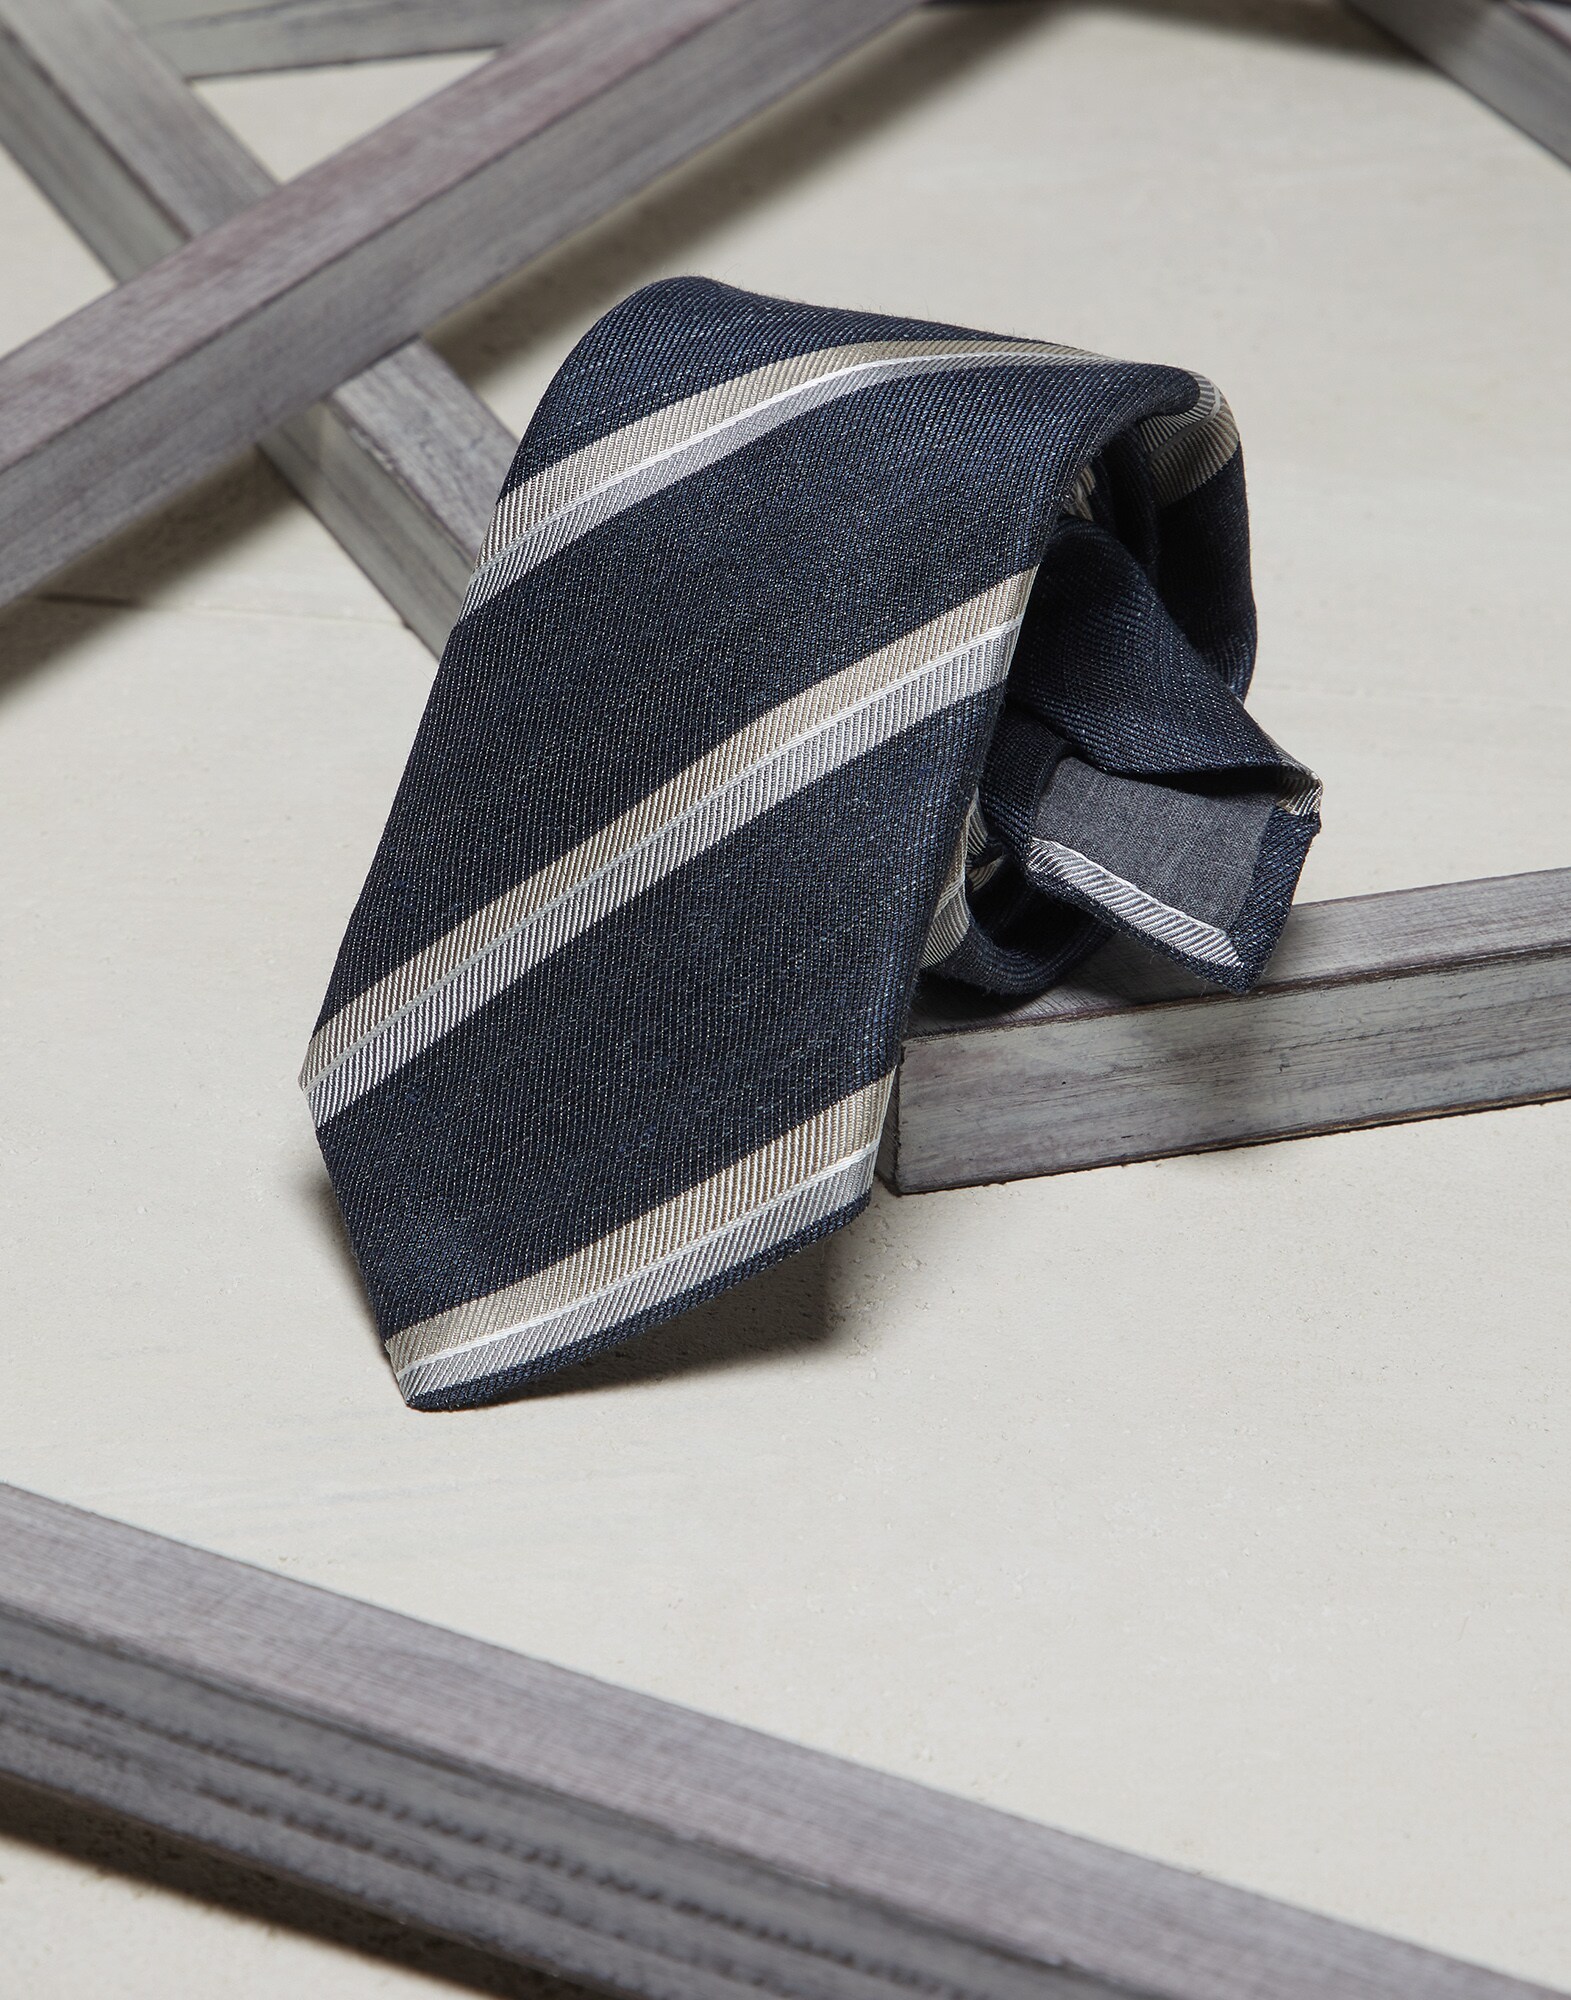 Men's ties and other accessories | Brunello Cucinelli